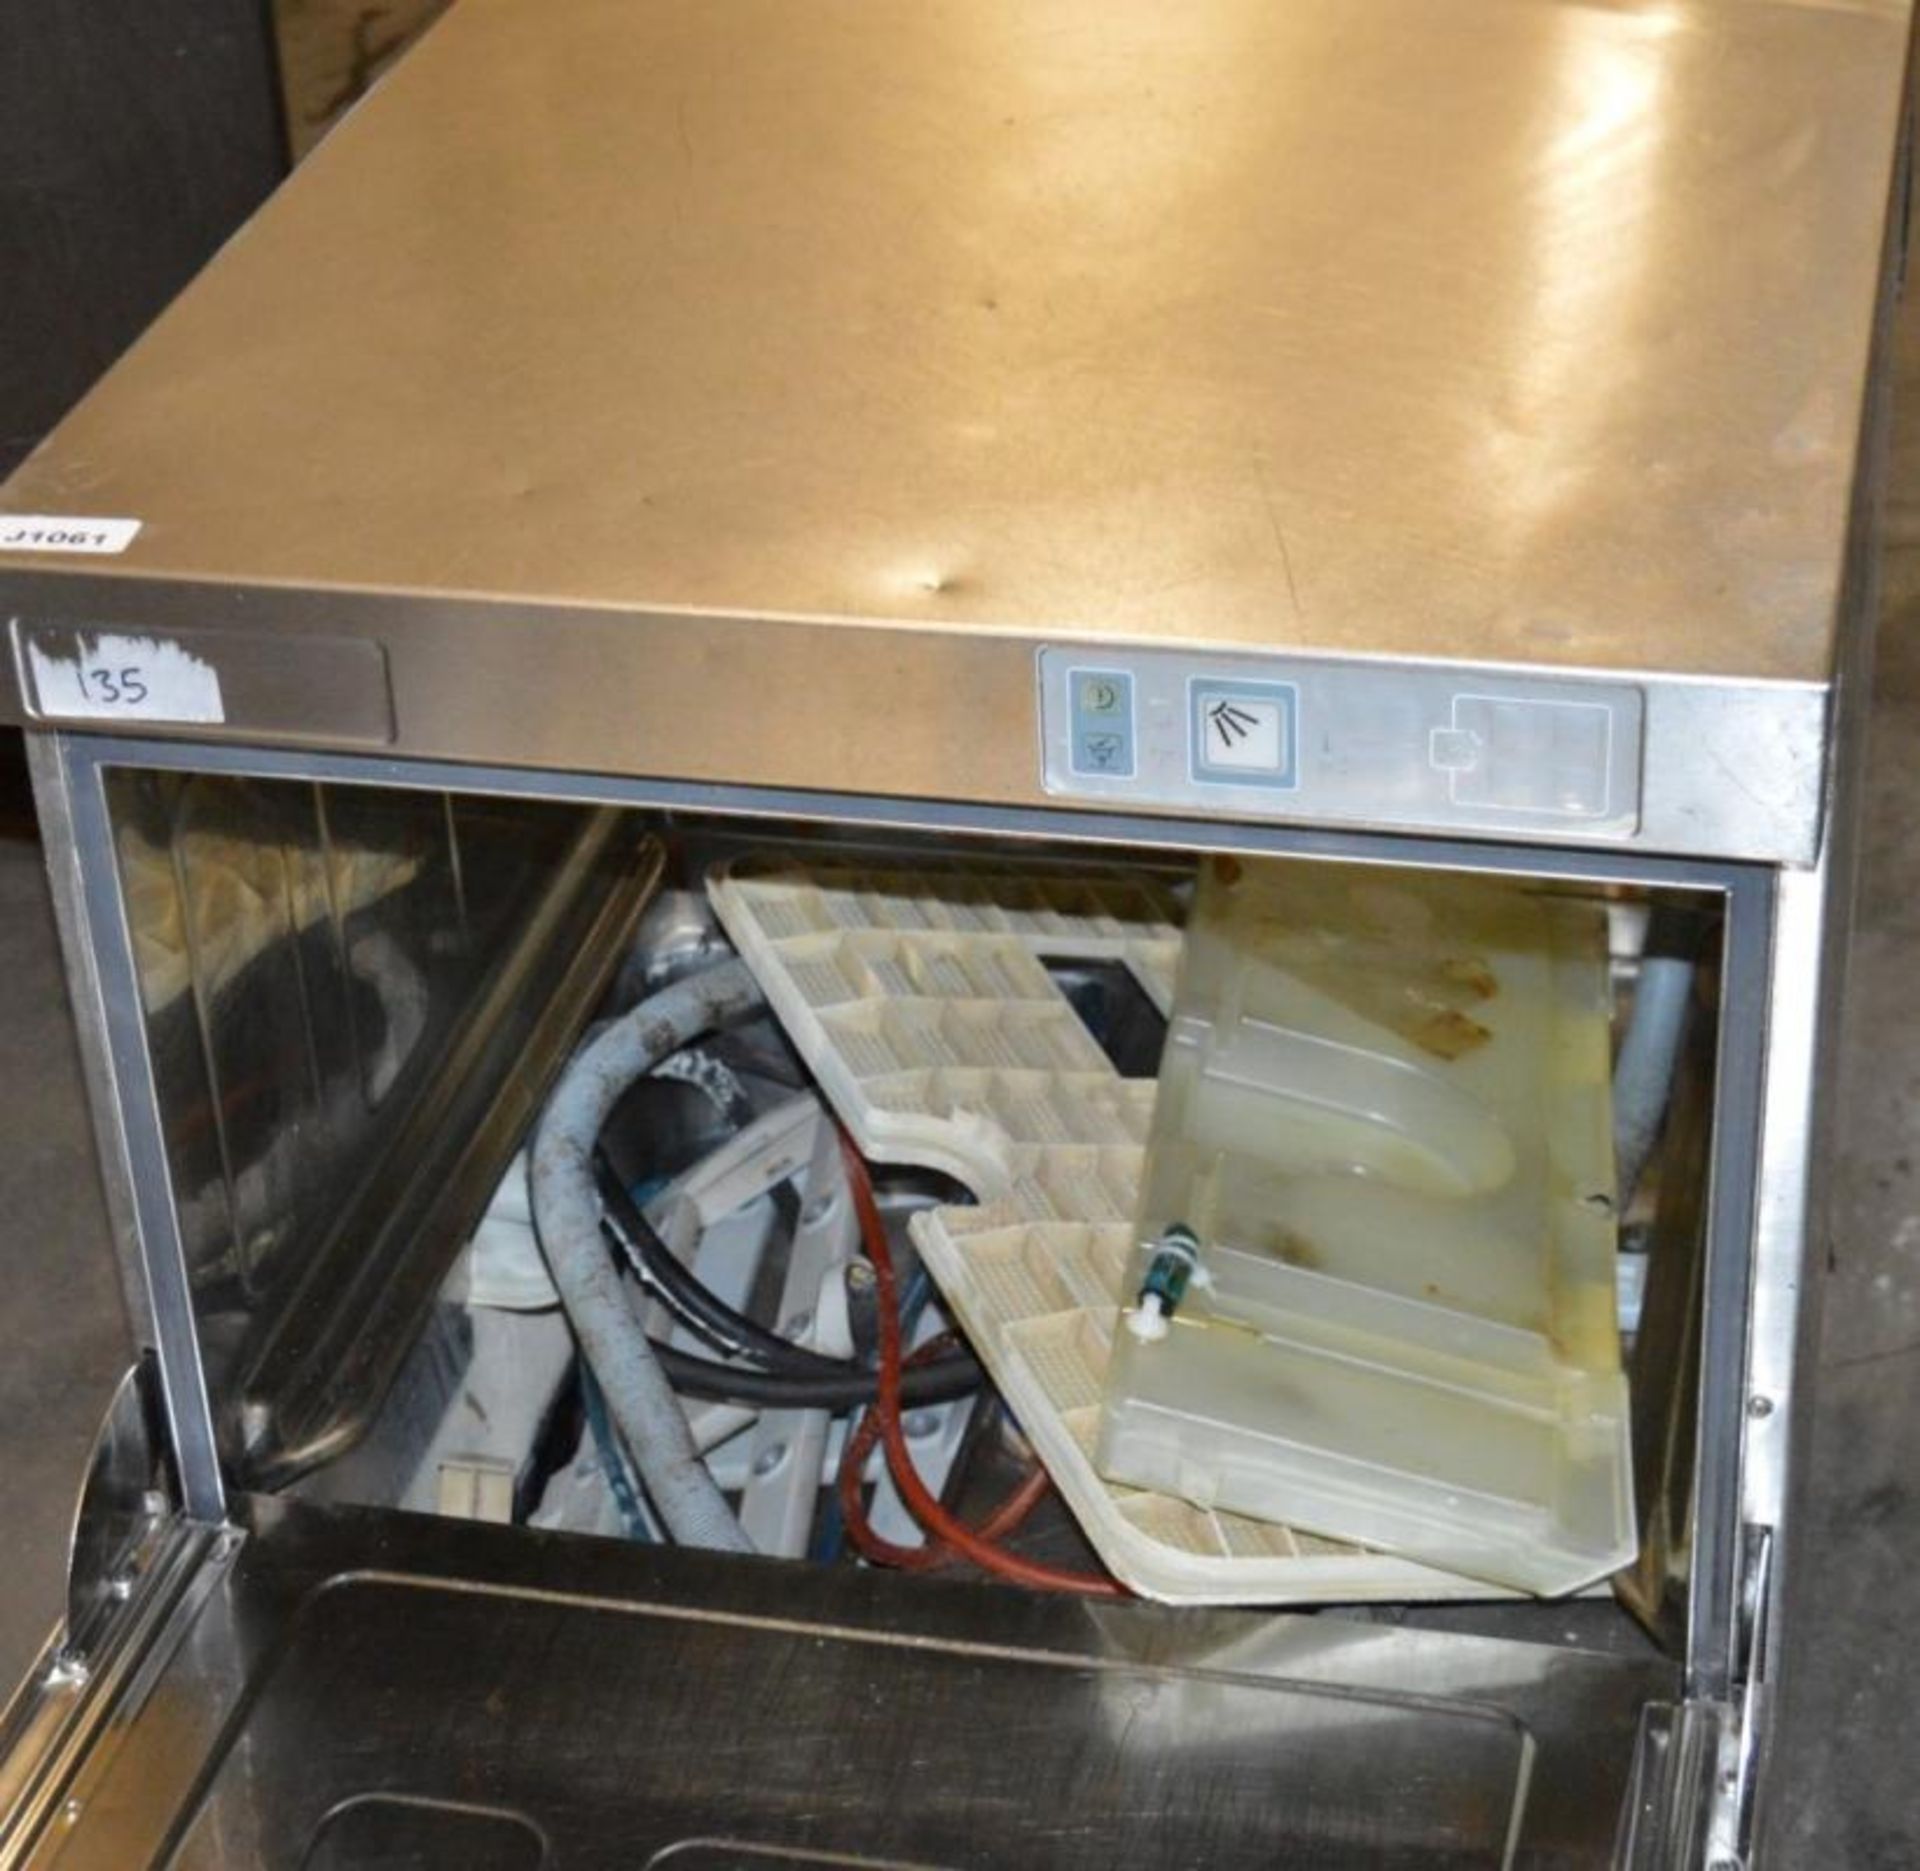 1 x Winterhalter GS Undercounter Commercial Dish Washer - Stainless Steel - 3 Phase - H70 x W60 x D6 - Image 4 of 4